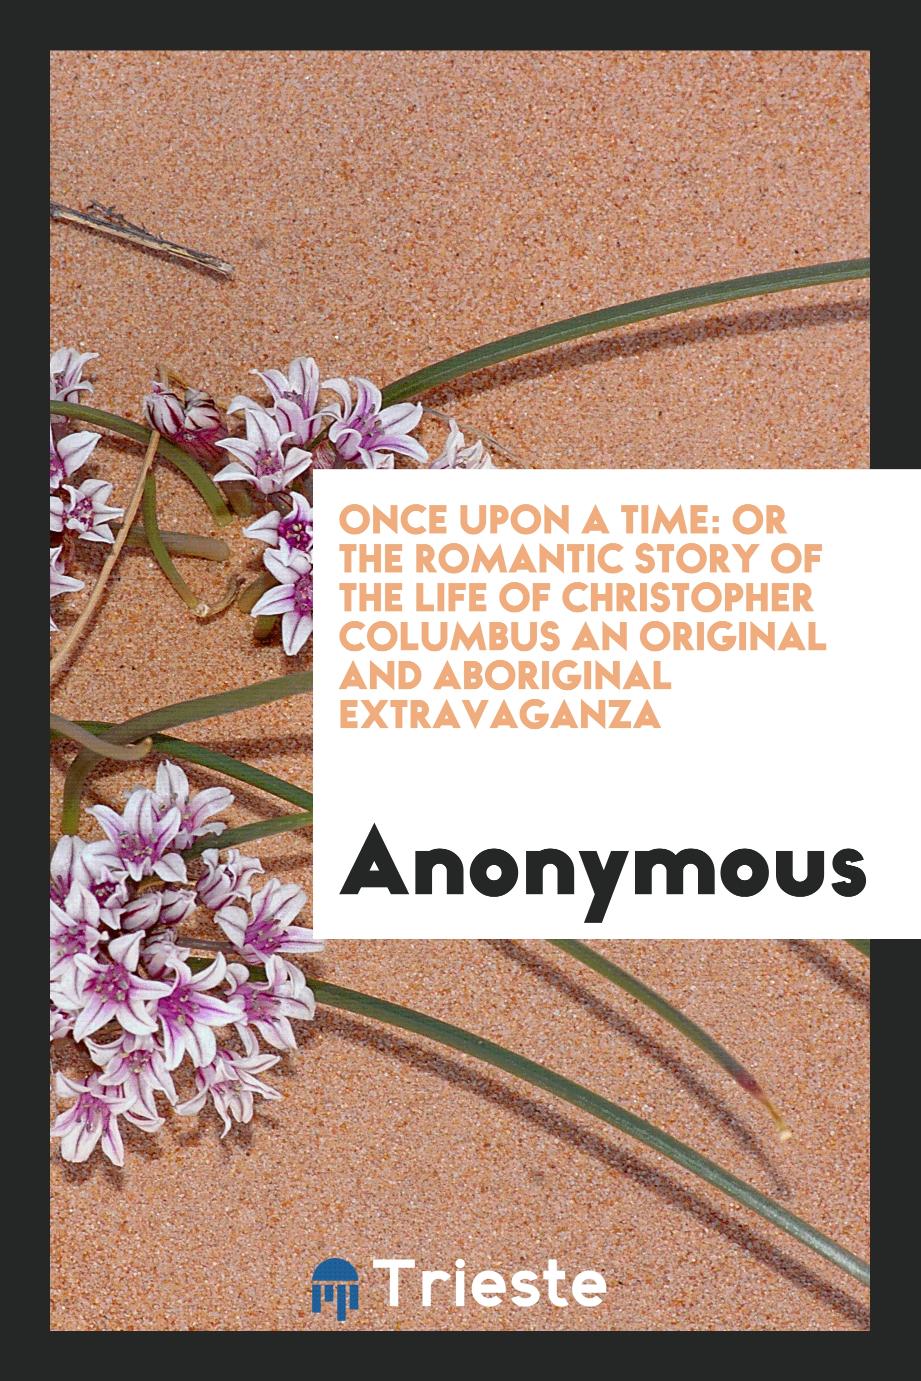 Once Upon a Time: Or the Romantic Story of the Life of Christopher Columbus an original and aboriginal extravaganza